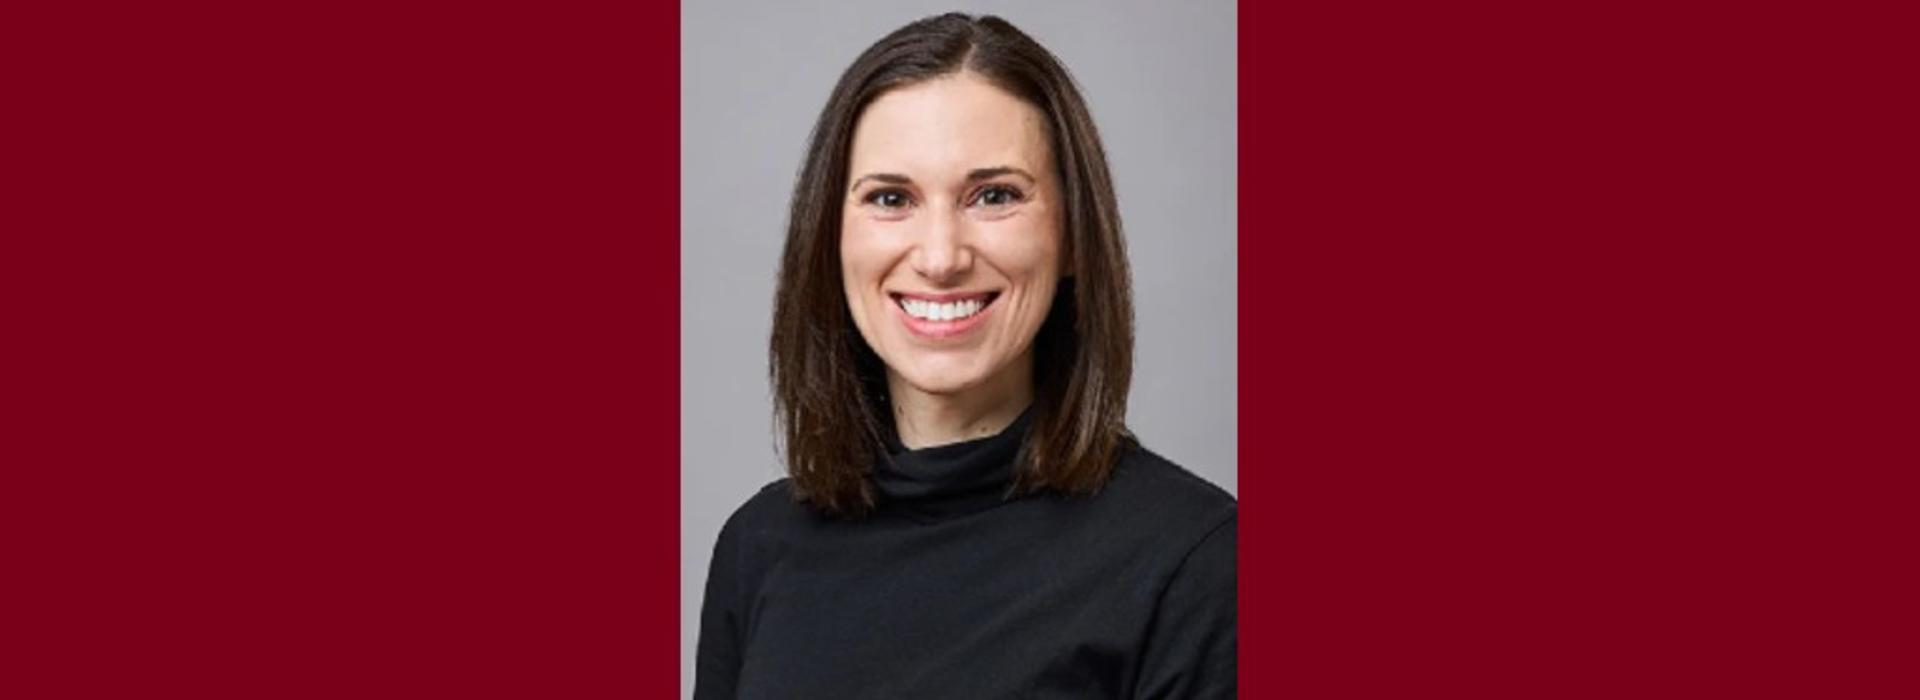 Portrait of Dr. Leah Henke against a maroon background.